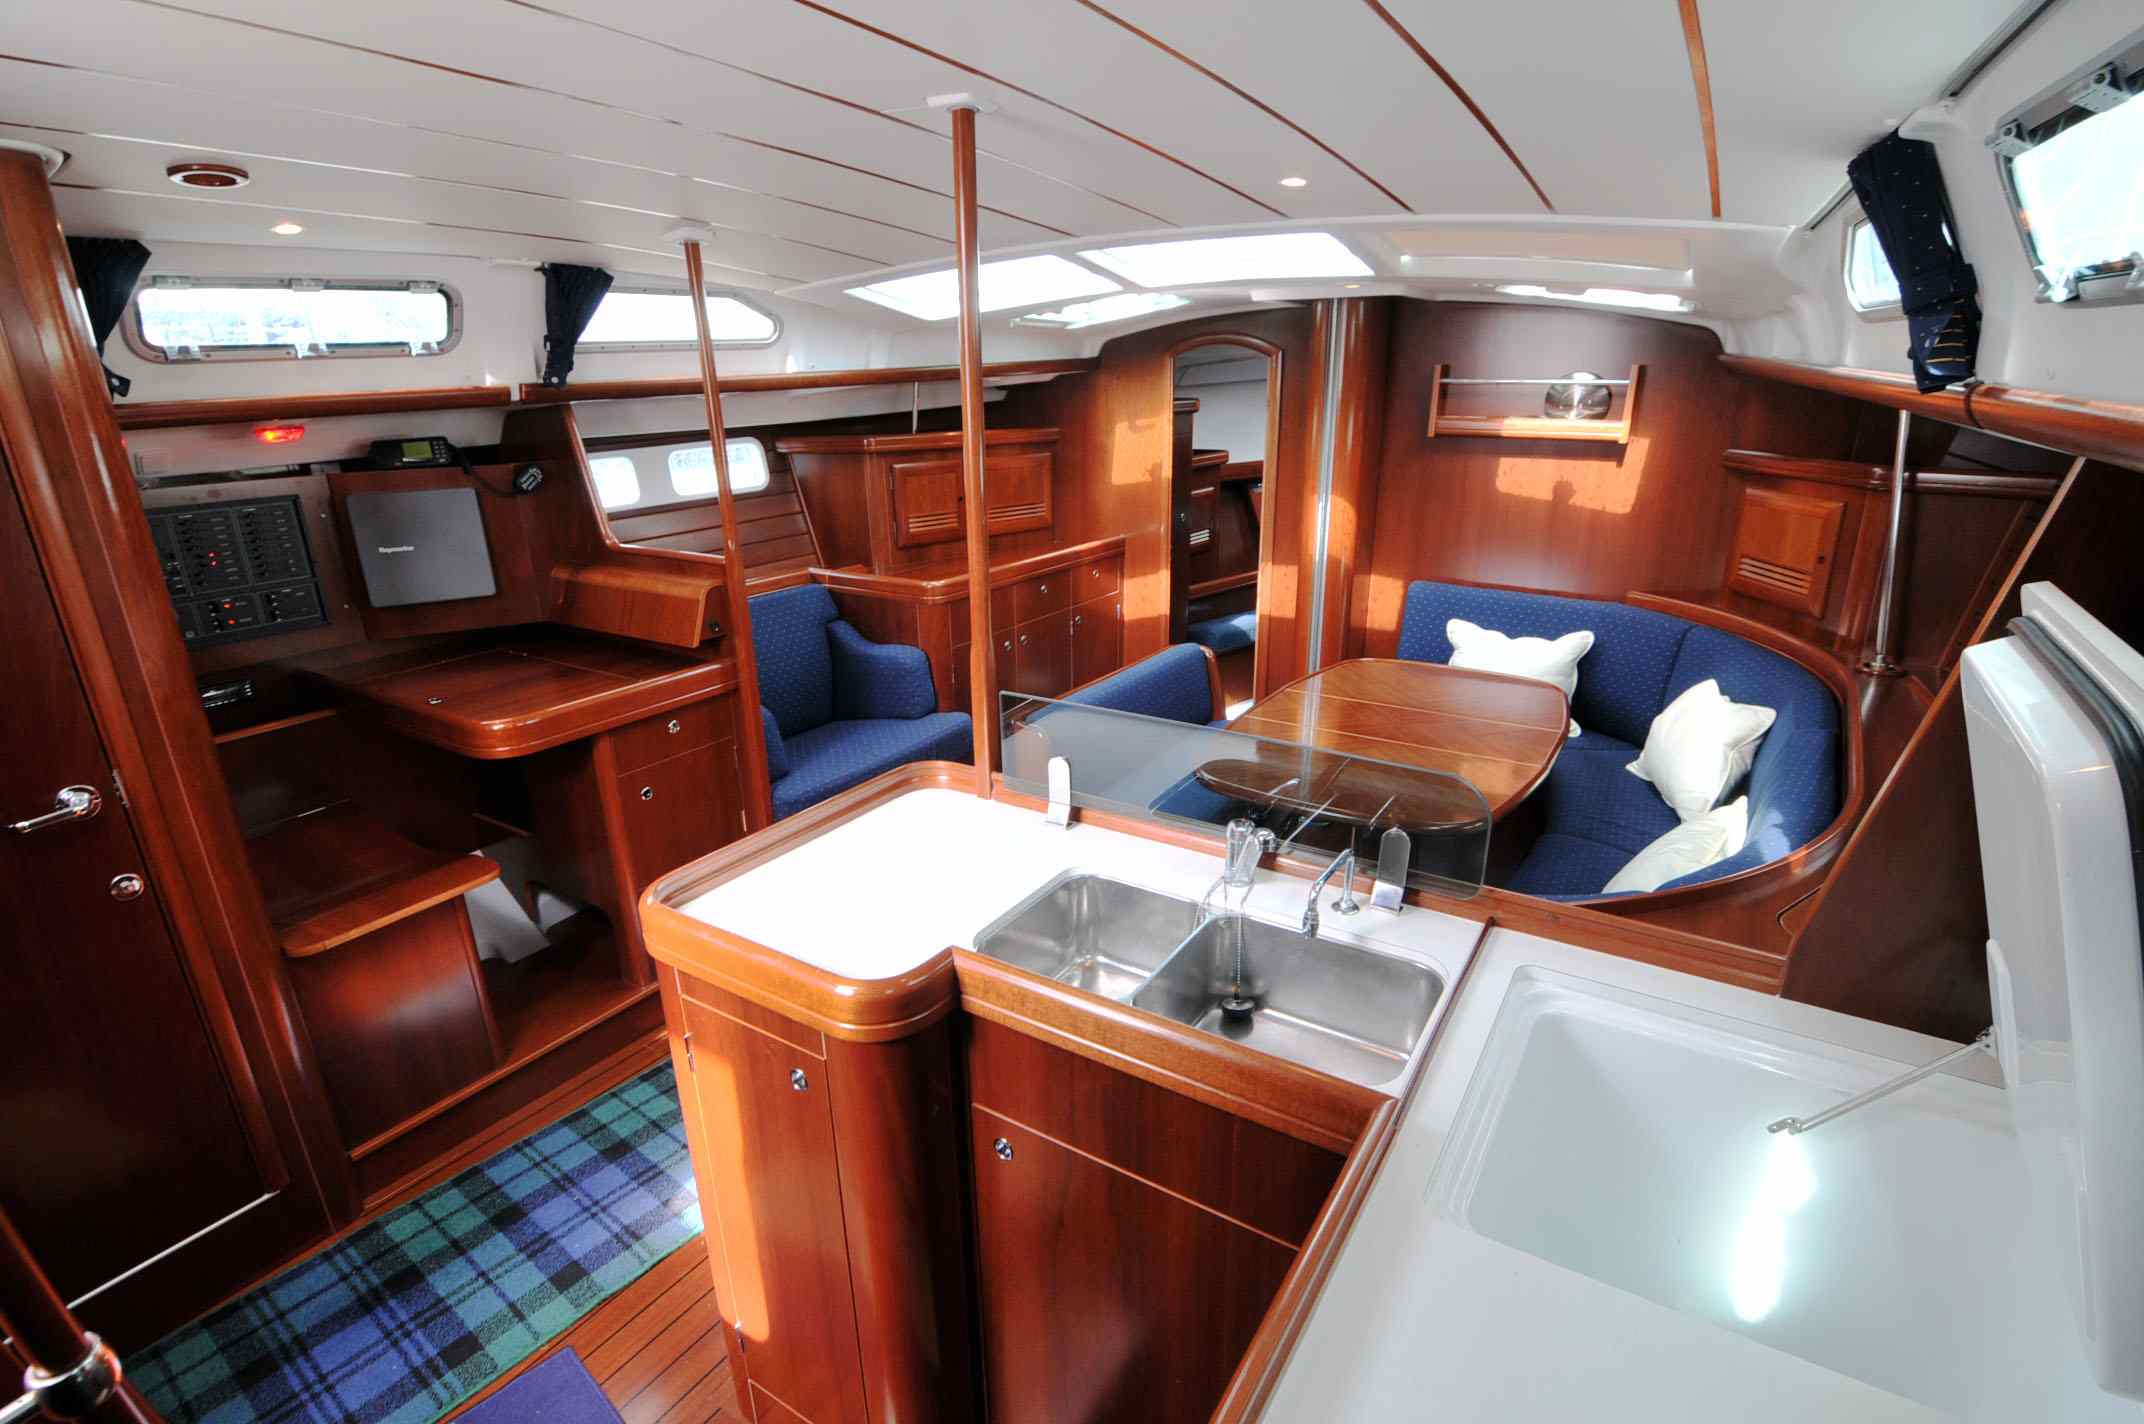 beneteau oceanis 473 - Yacht Charter United Kingdom & Boat hire in United Kingdom Scotland Firth of Clyde Ardrossan Marina Clyde 3